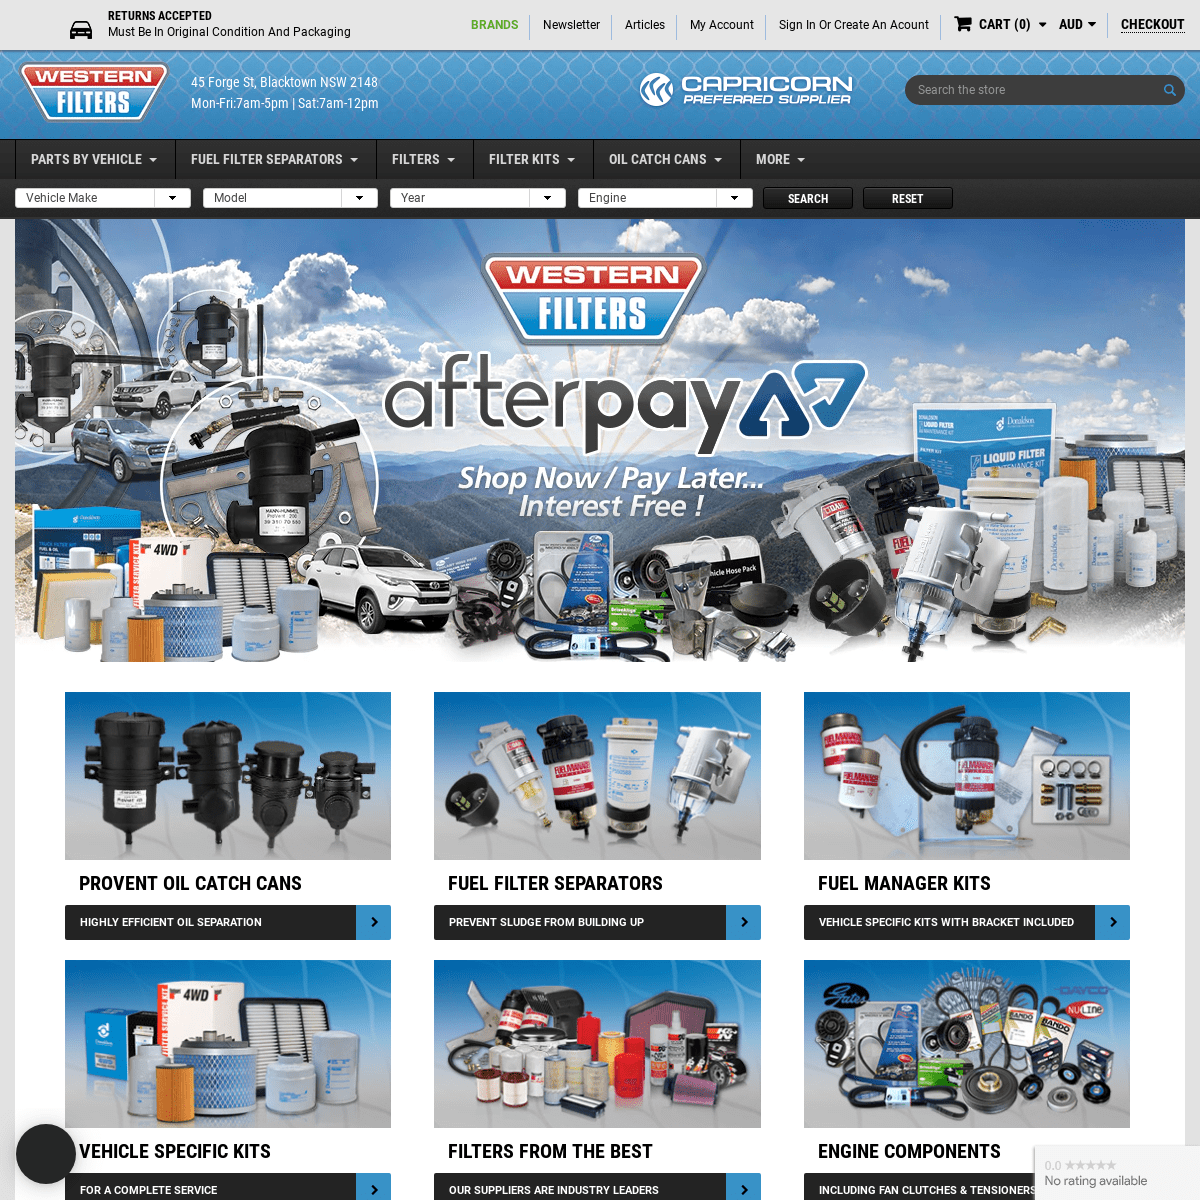 Auto Parts & Spares - Filter Kits, Air Fuel Oil Filters, DPFs, Filter Cleaning - Western Filters Sydney Australia